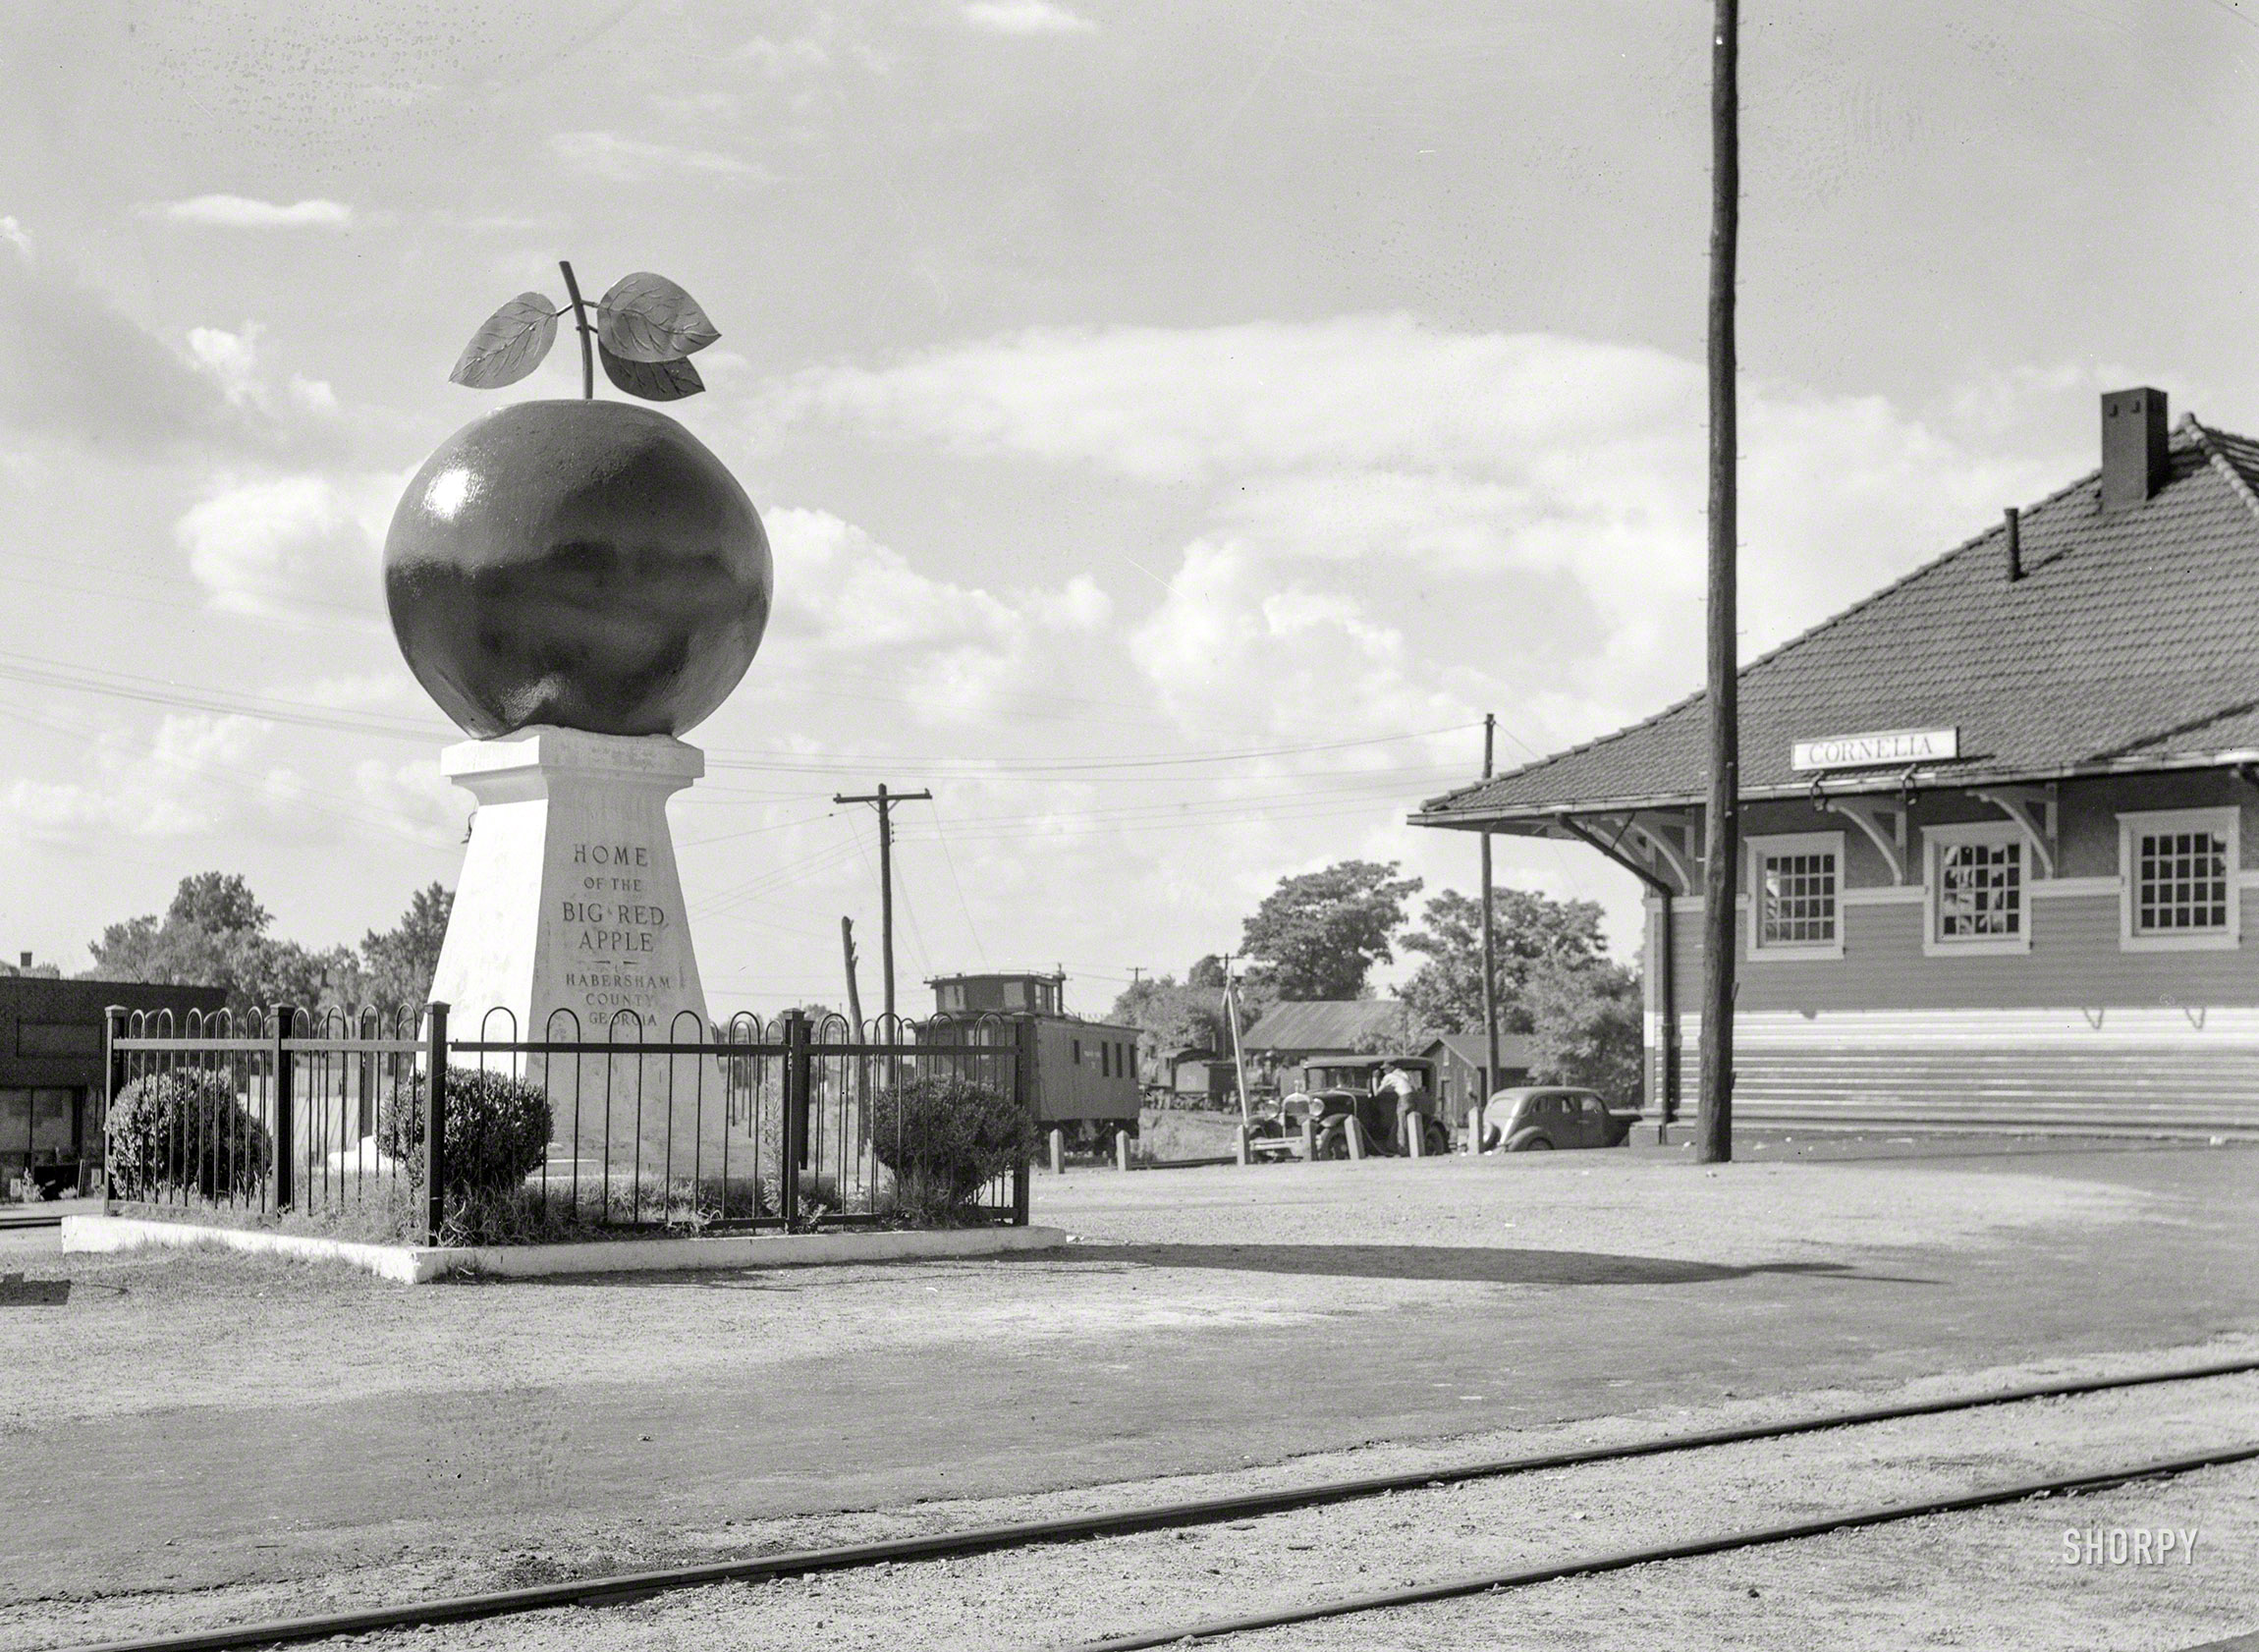 June 1936. "Apple monument at depot of Cornelia, Georgia." Medium format negative by Carl Mydans for the Farm Security Administration. View full size.